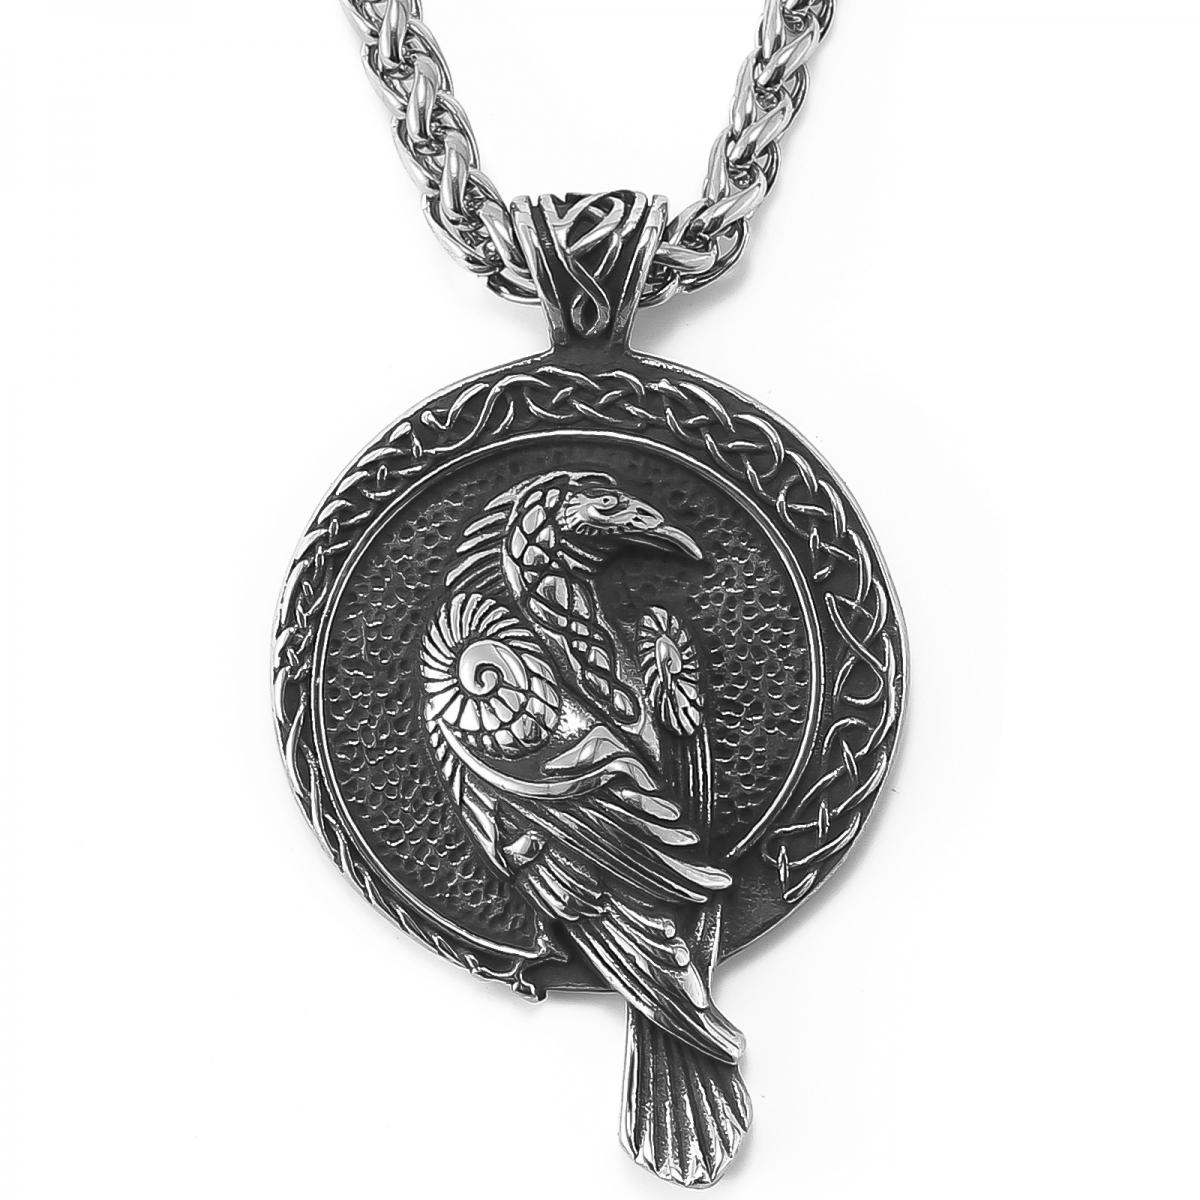 Raven Coin Necklace US$3.5/PC-NORSECOLLECTION- Viking Jewelry,Viking Necklace,Viking Bracelet,Viking Rings,Viking Mugs,Viking Accessories,Viking Crafts